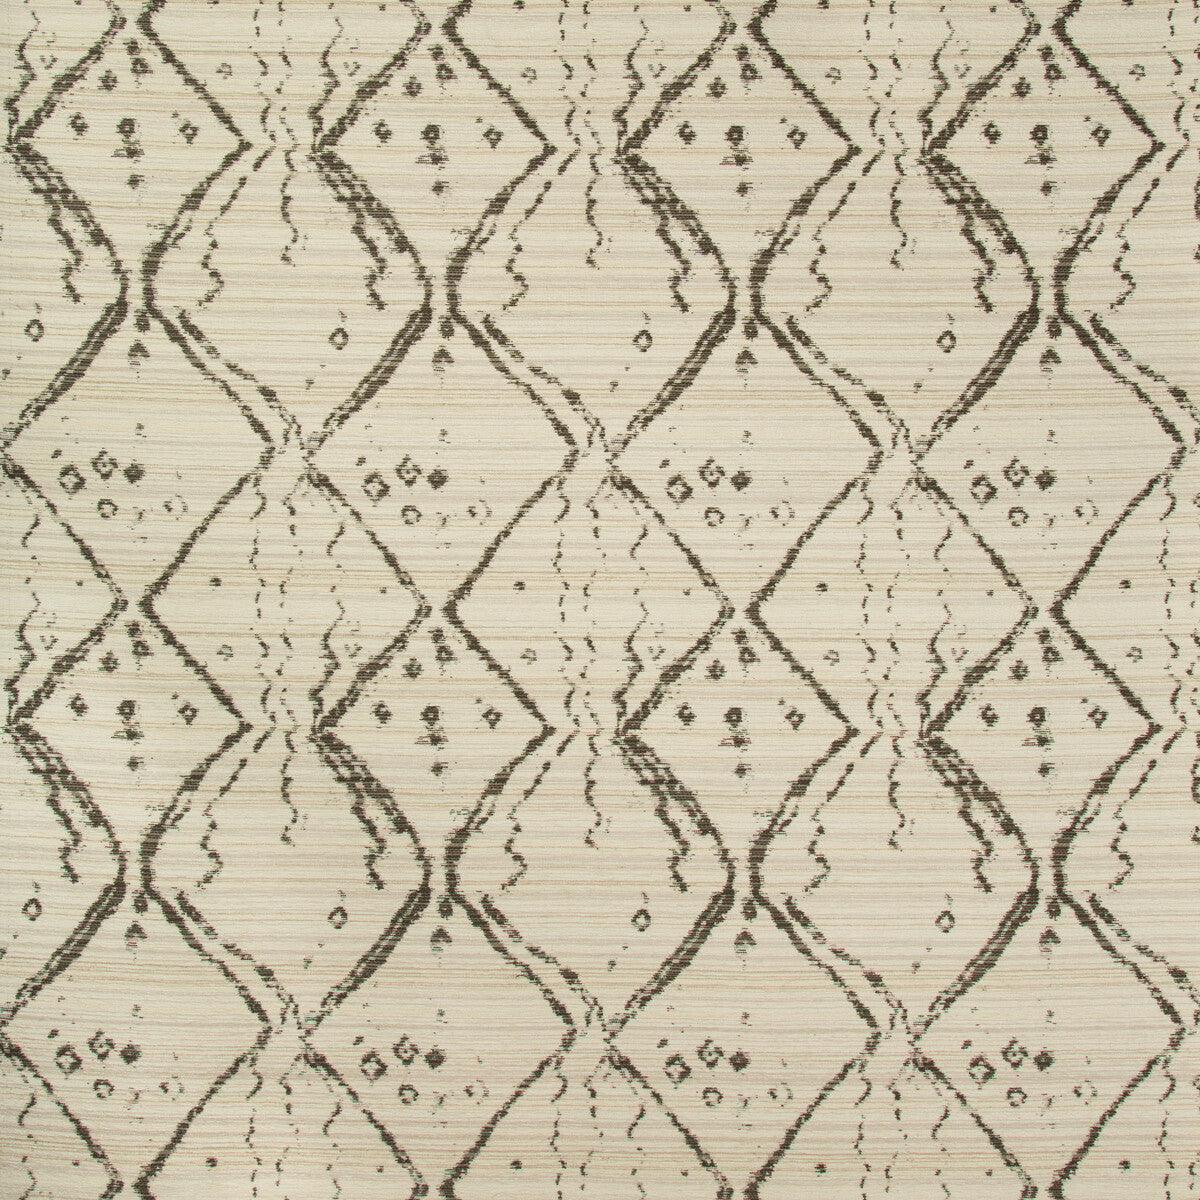 Globe Trot fabric in stone color - pattern 34948.106.0 - by Kravet Design in the Nate Berkus Well-Traveled collection